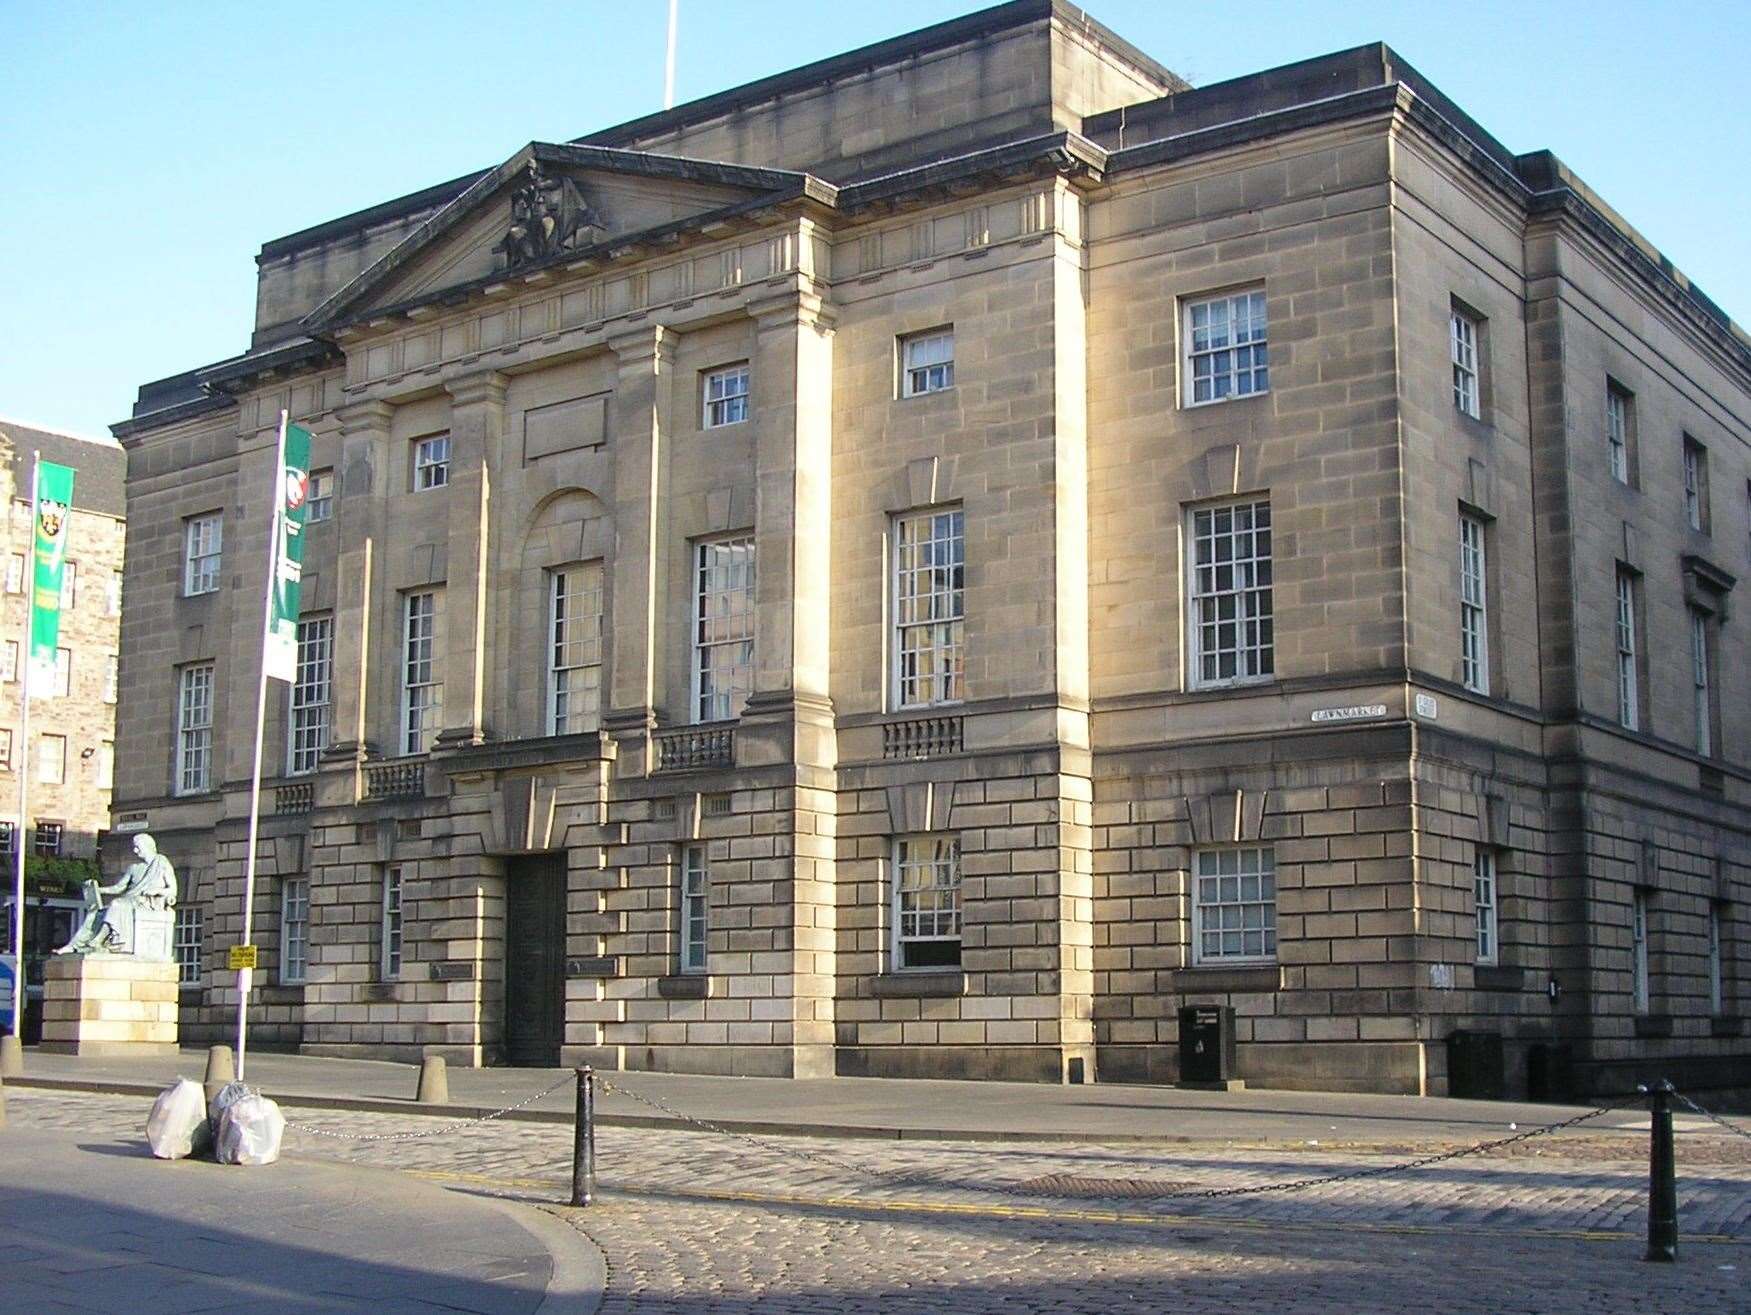 The High Court in Edinburgh, where the appeal was rejected on Friday.